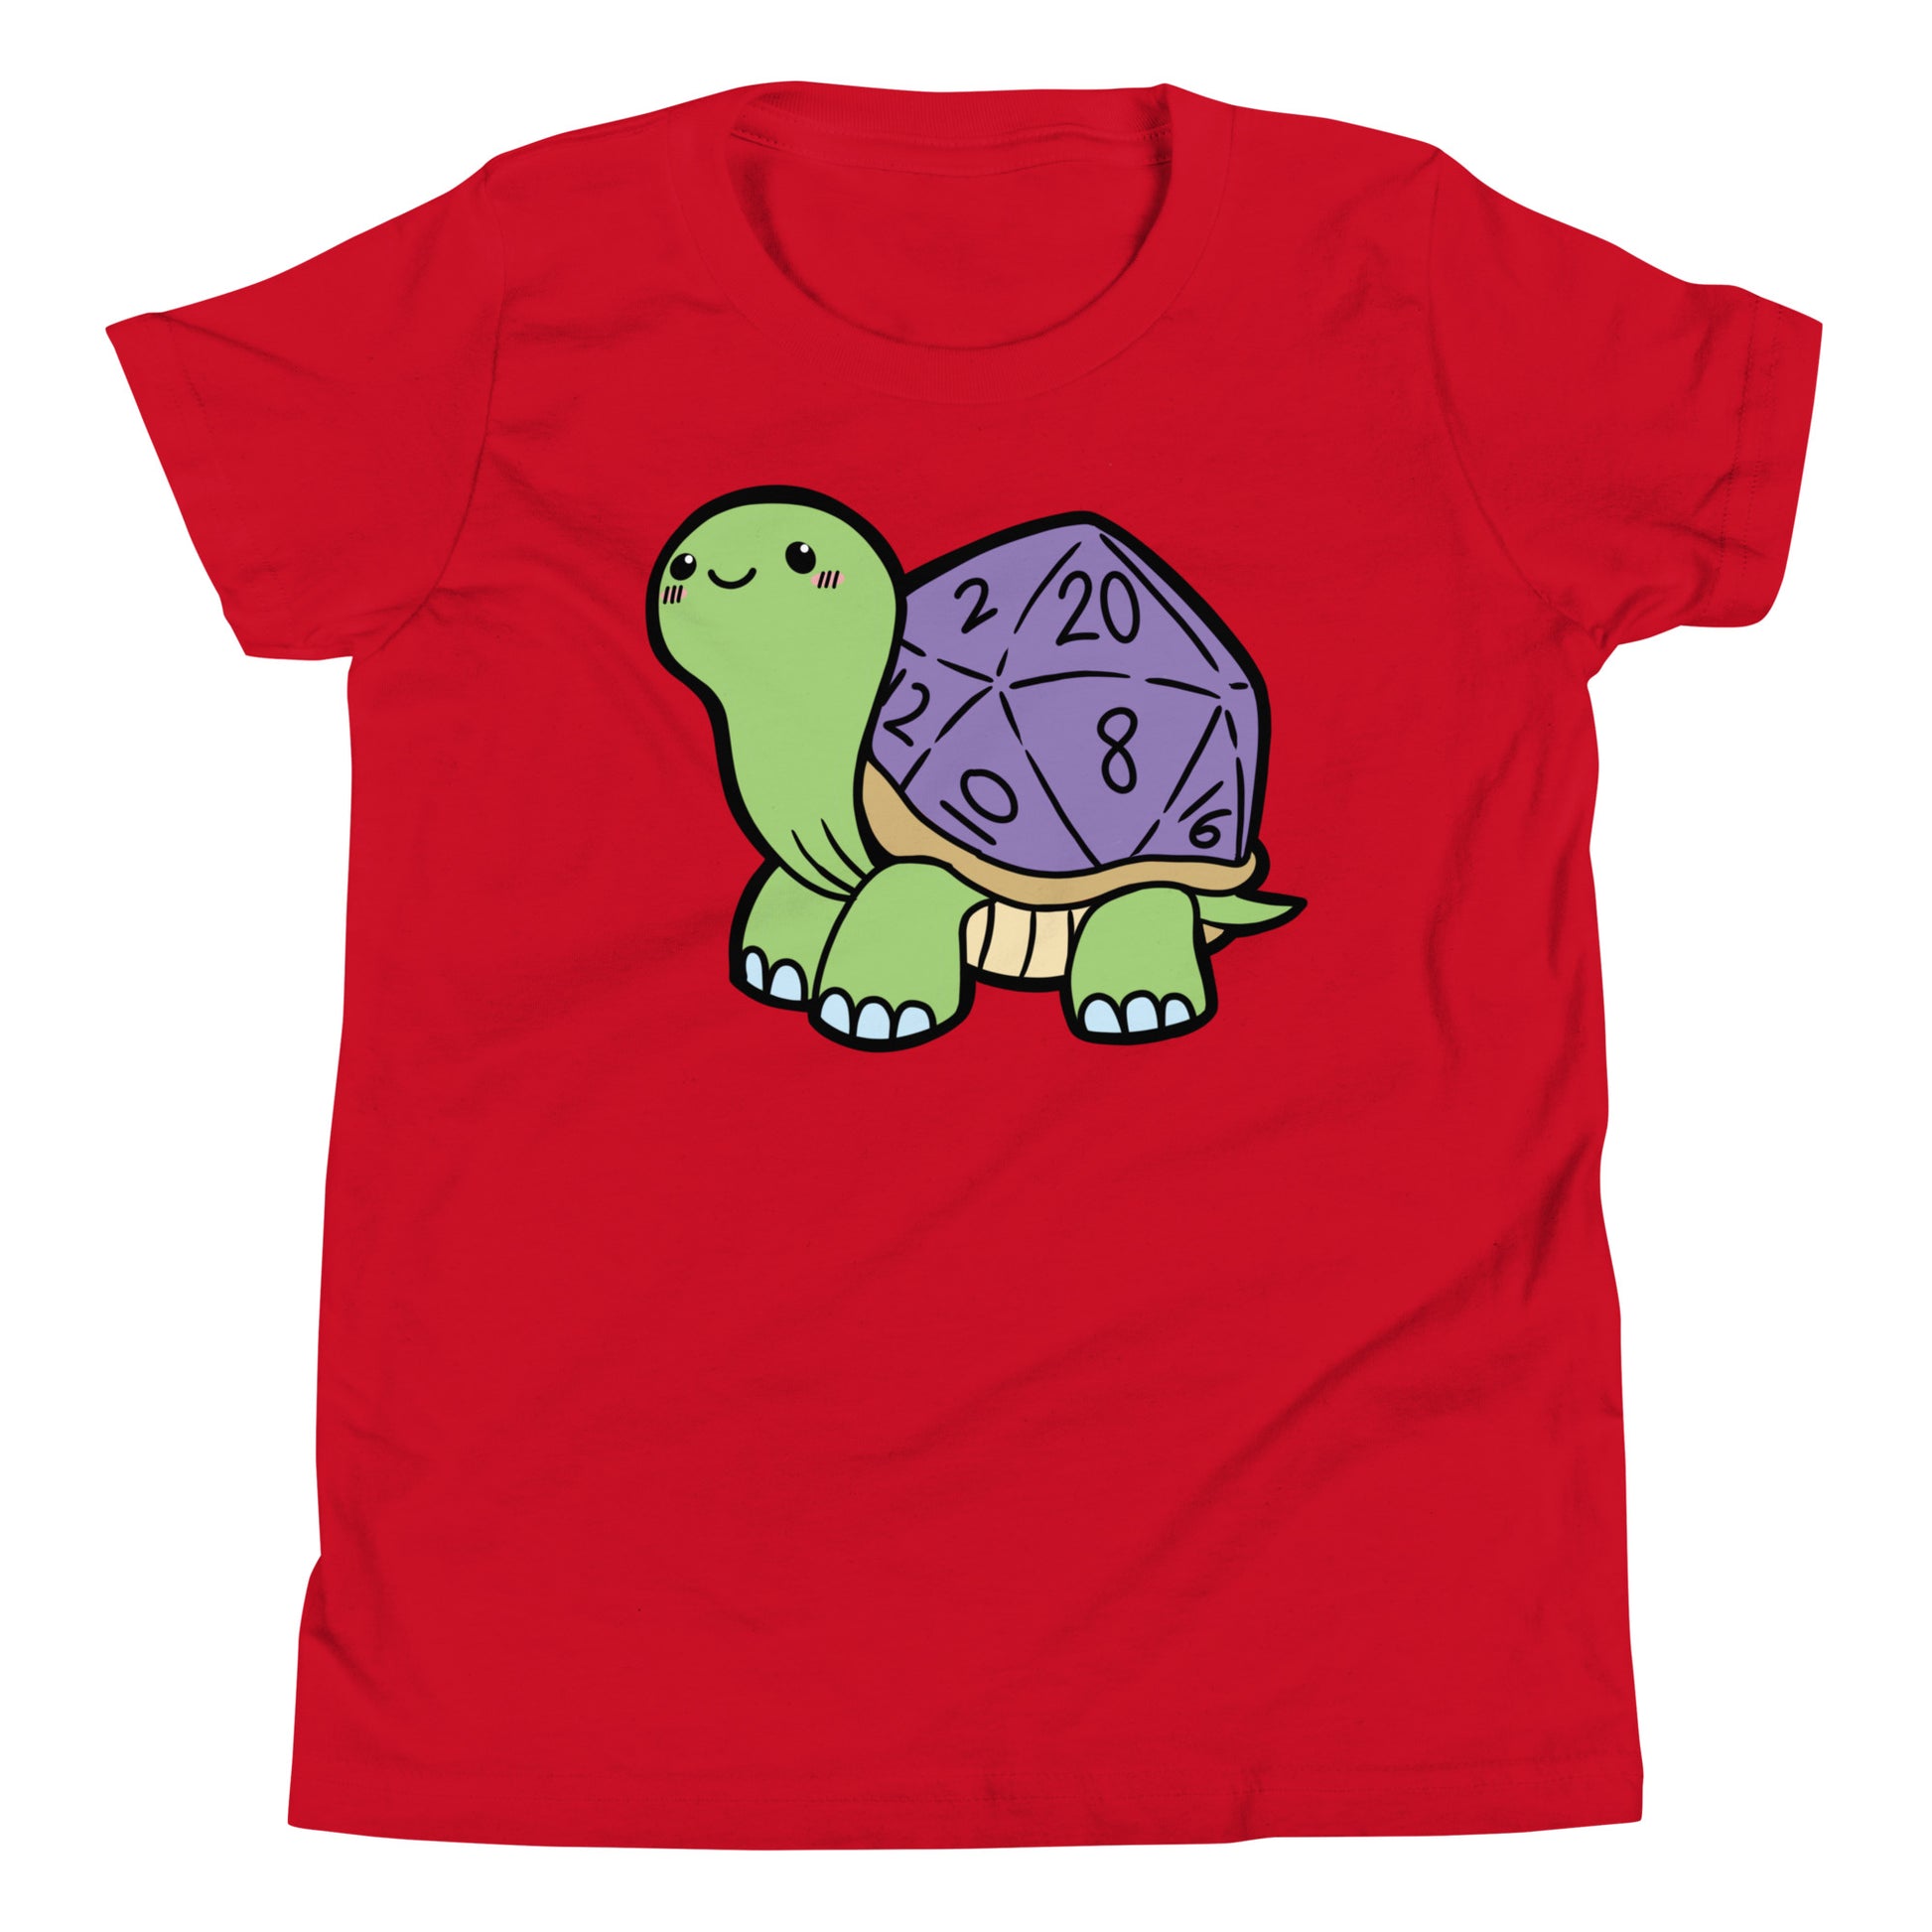 D20 Dice Turtle Youth Short Sleeve T-Shirt  Level 1 Gamers Red S 